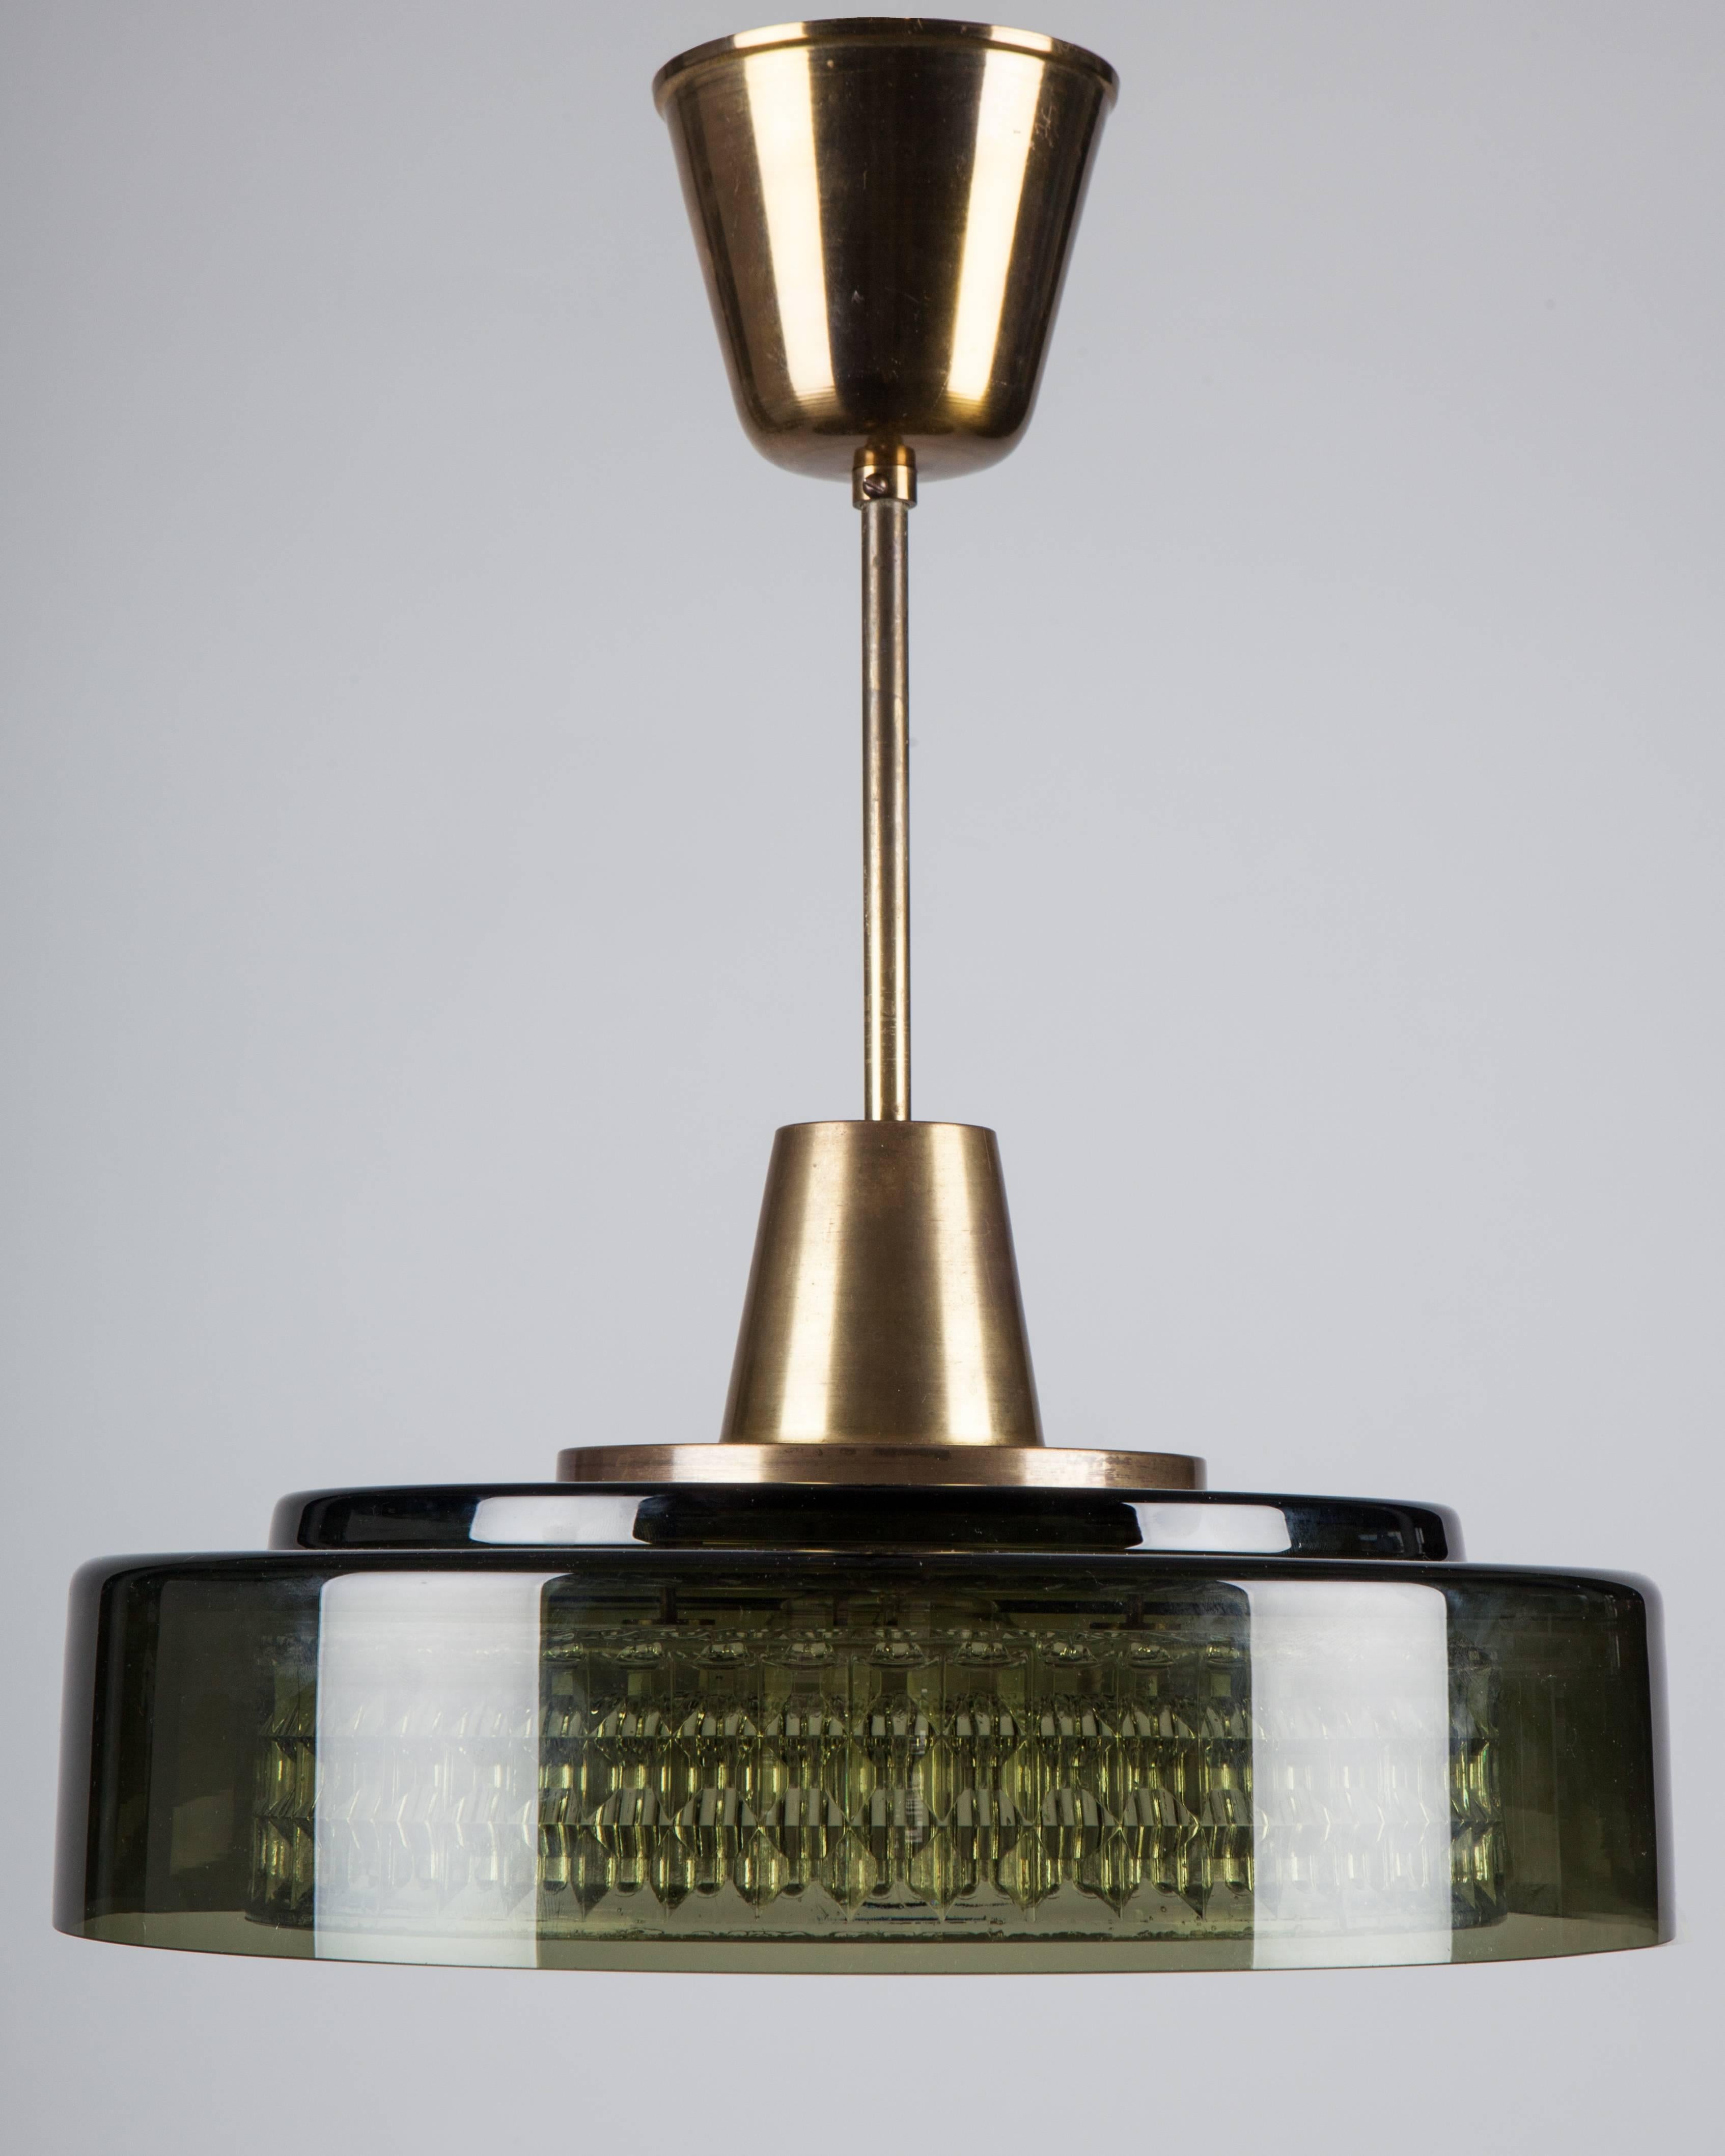 AHL3991.
A vintage olive and clear glass pendant suspended on brass fittings in their original patina. This mid century modern fixture was designed by Carl Fagerlund for the Swedish glassmaker Orrefors. Due to the antique nature of this fixture,